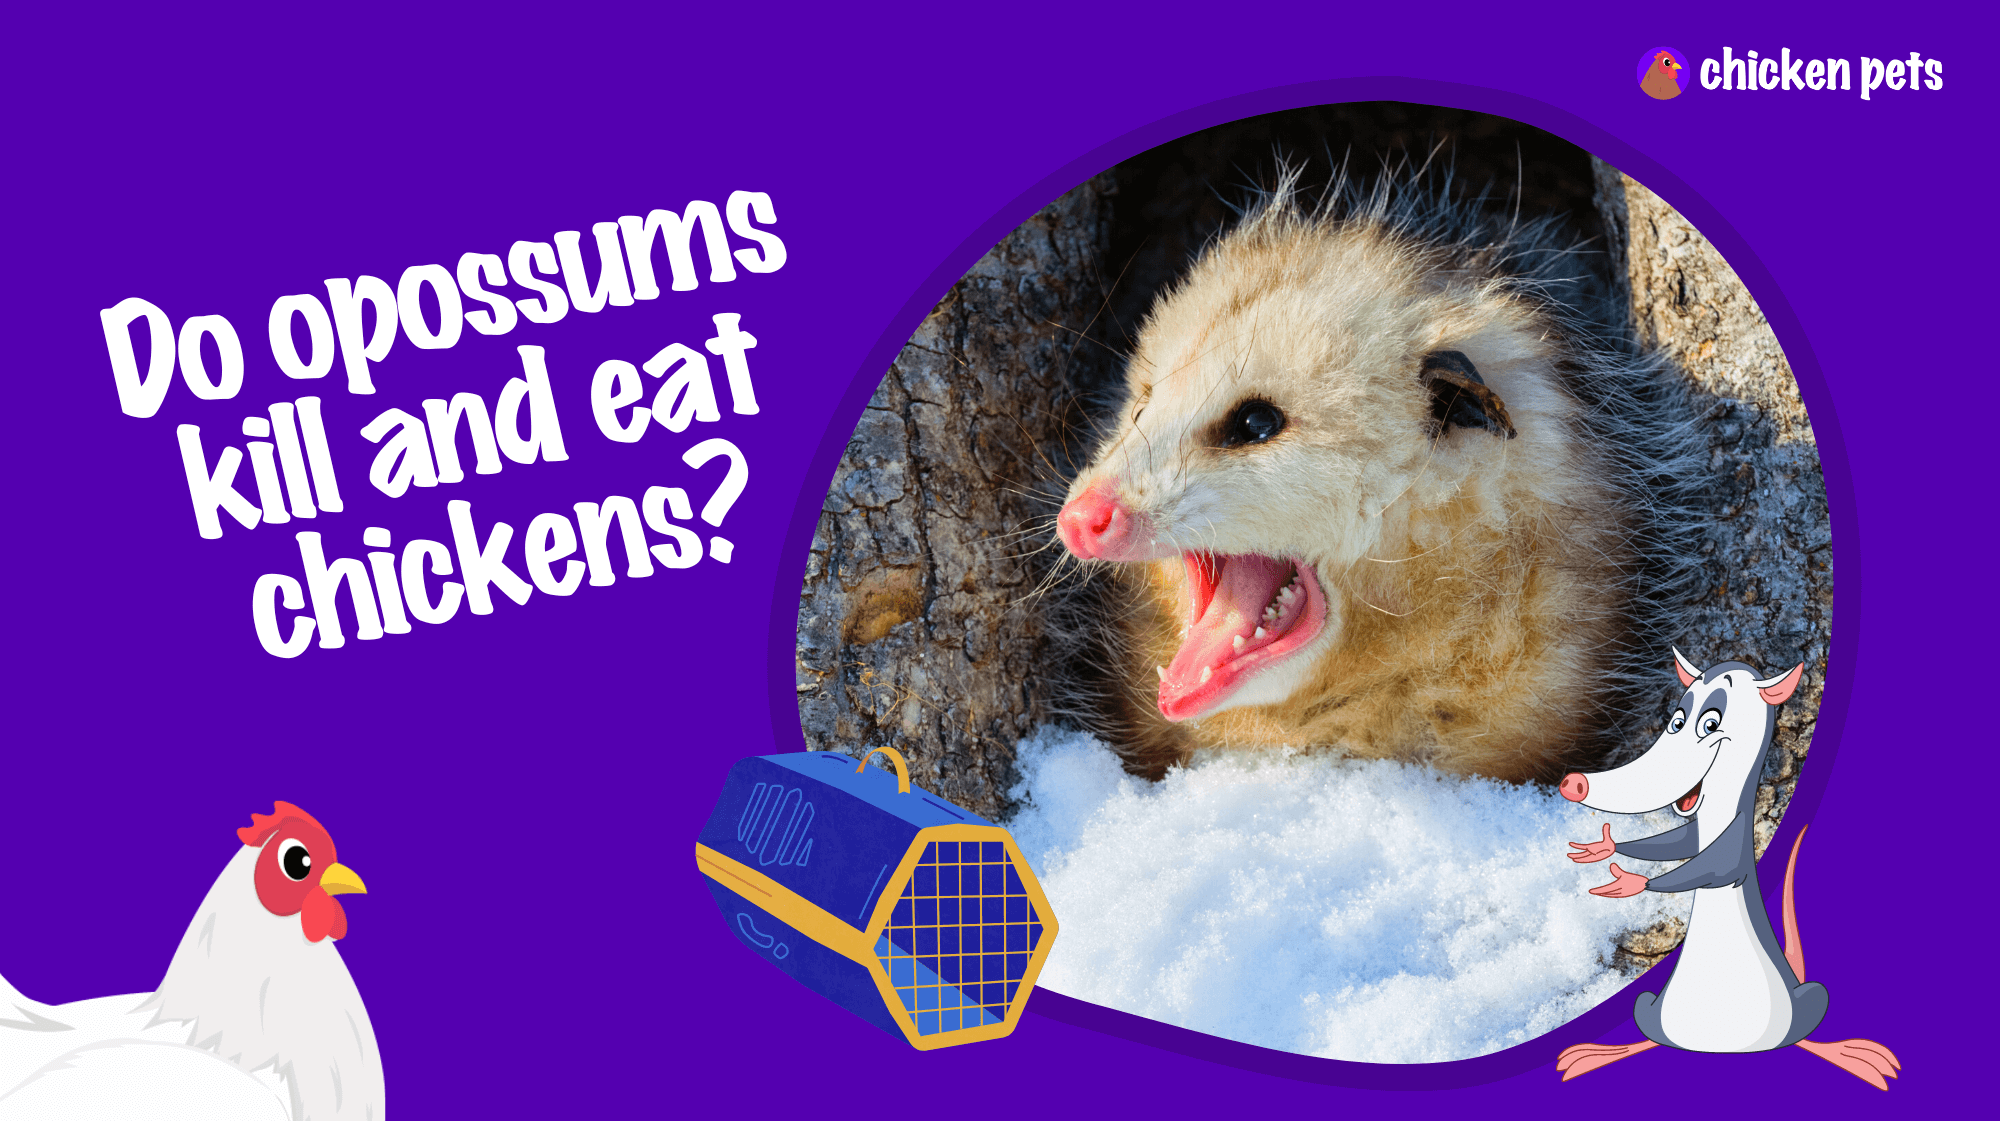 do opossums kill and eat chickens